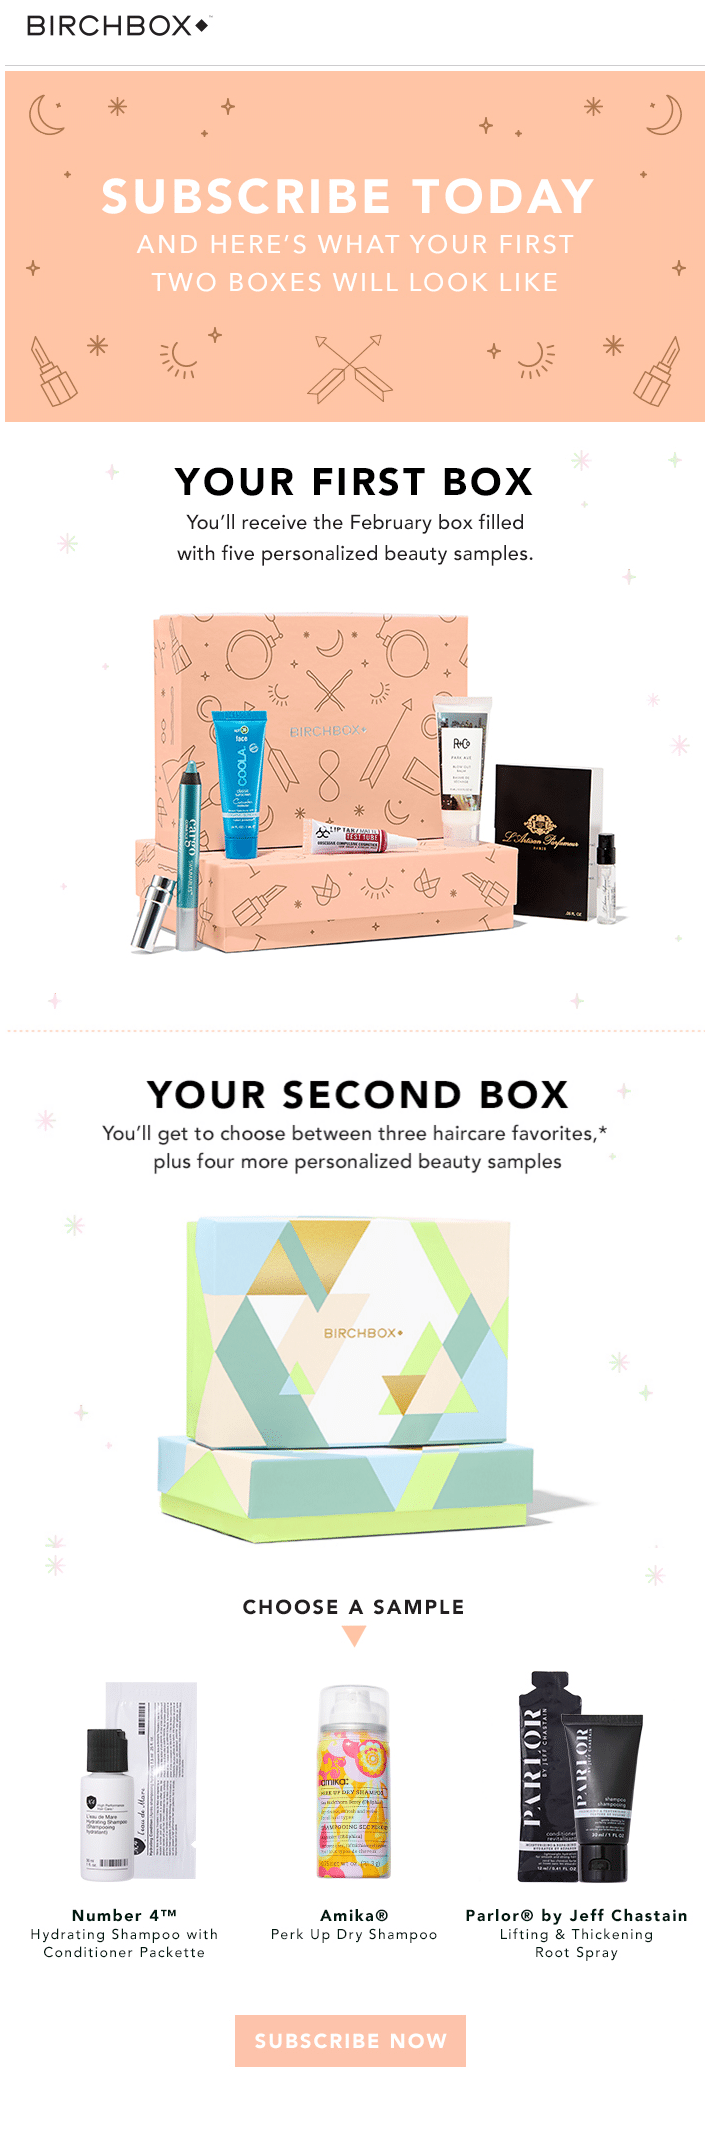 Birchbox Call to Action